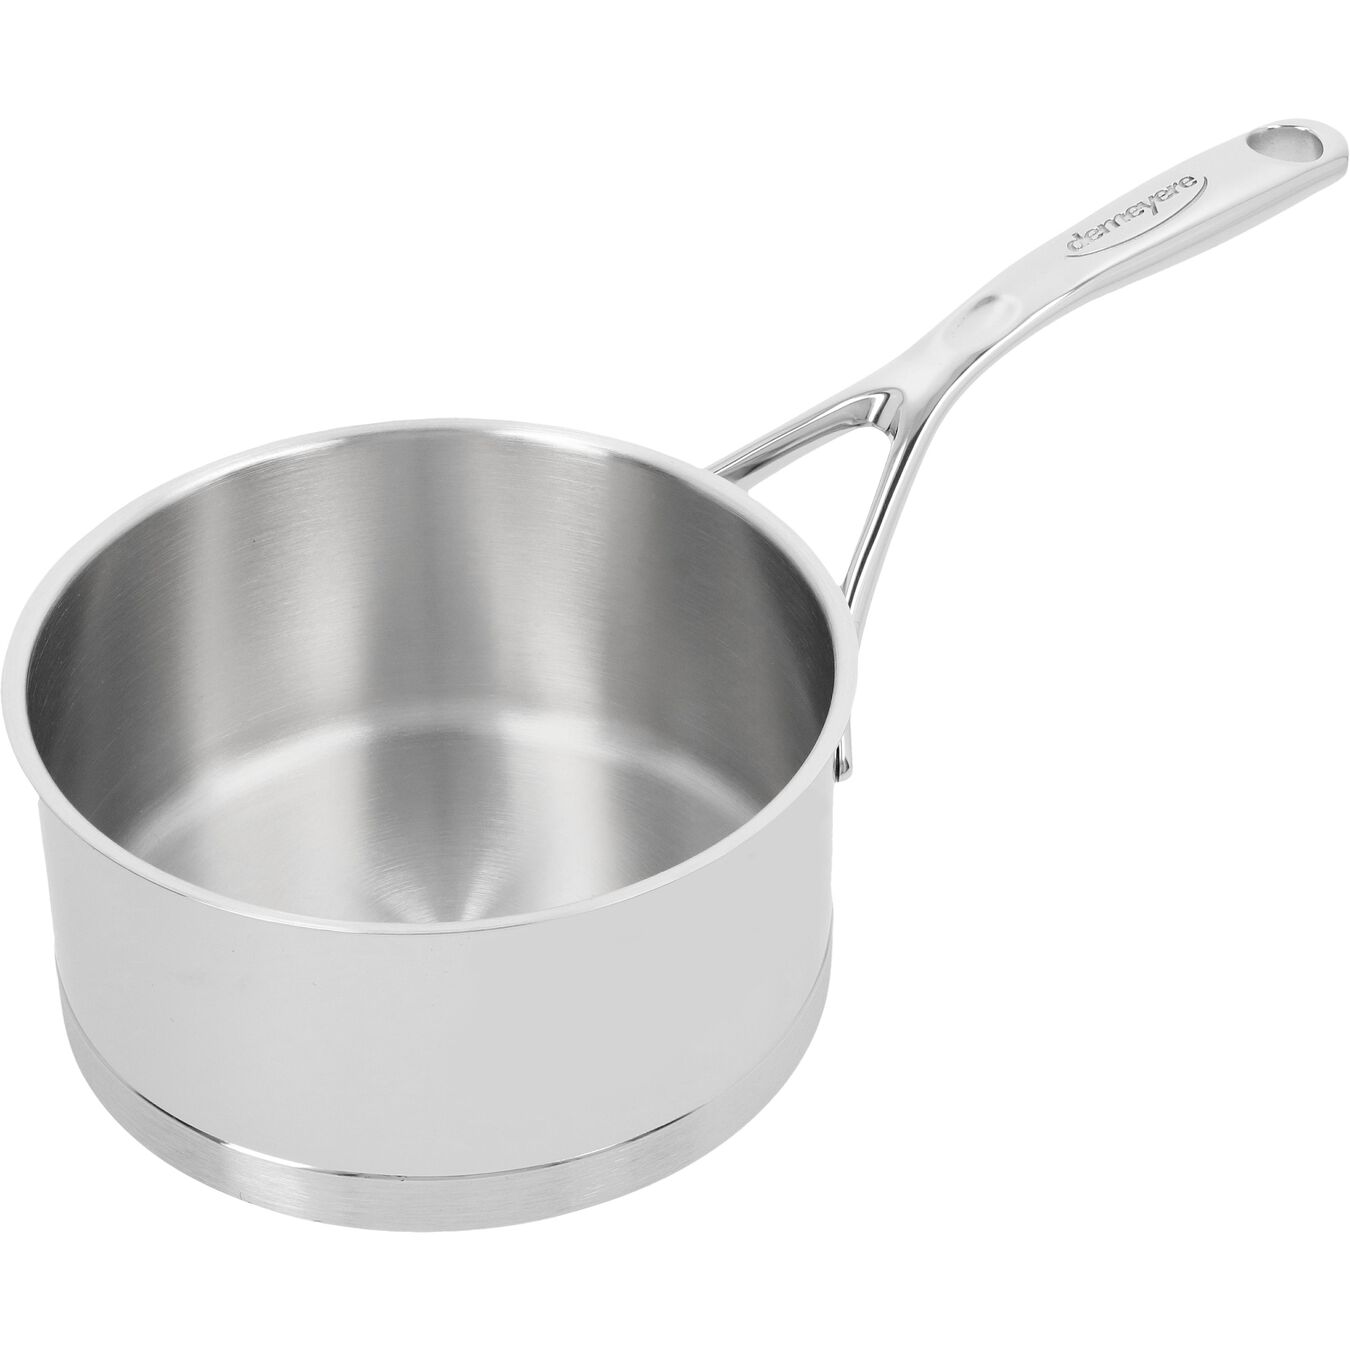 16 cm 18/10 Stainless Steel Saucepan without lid silver,,large 3